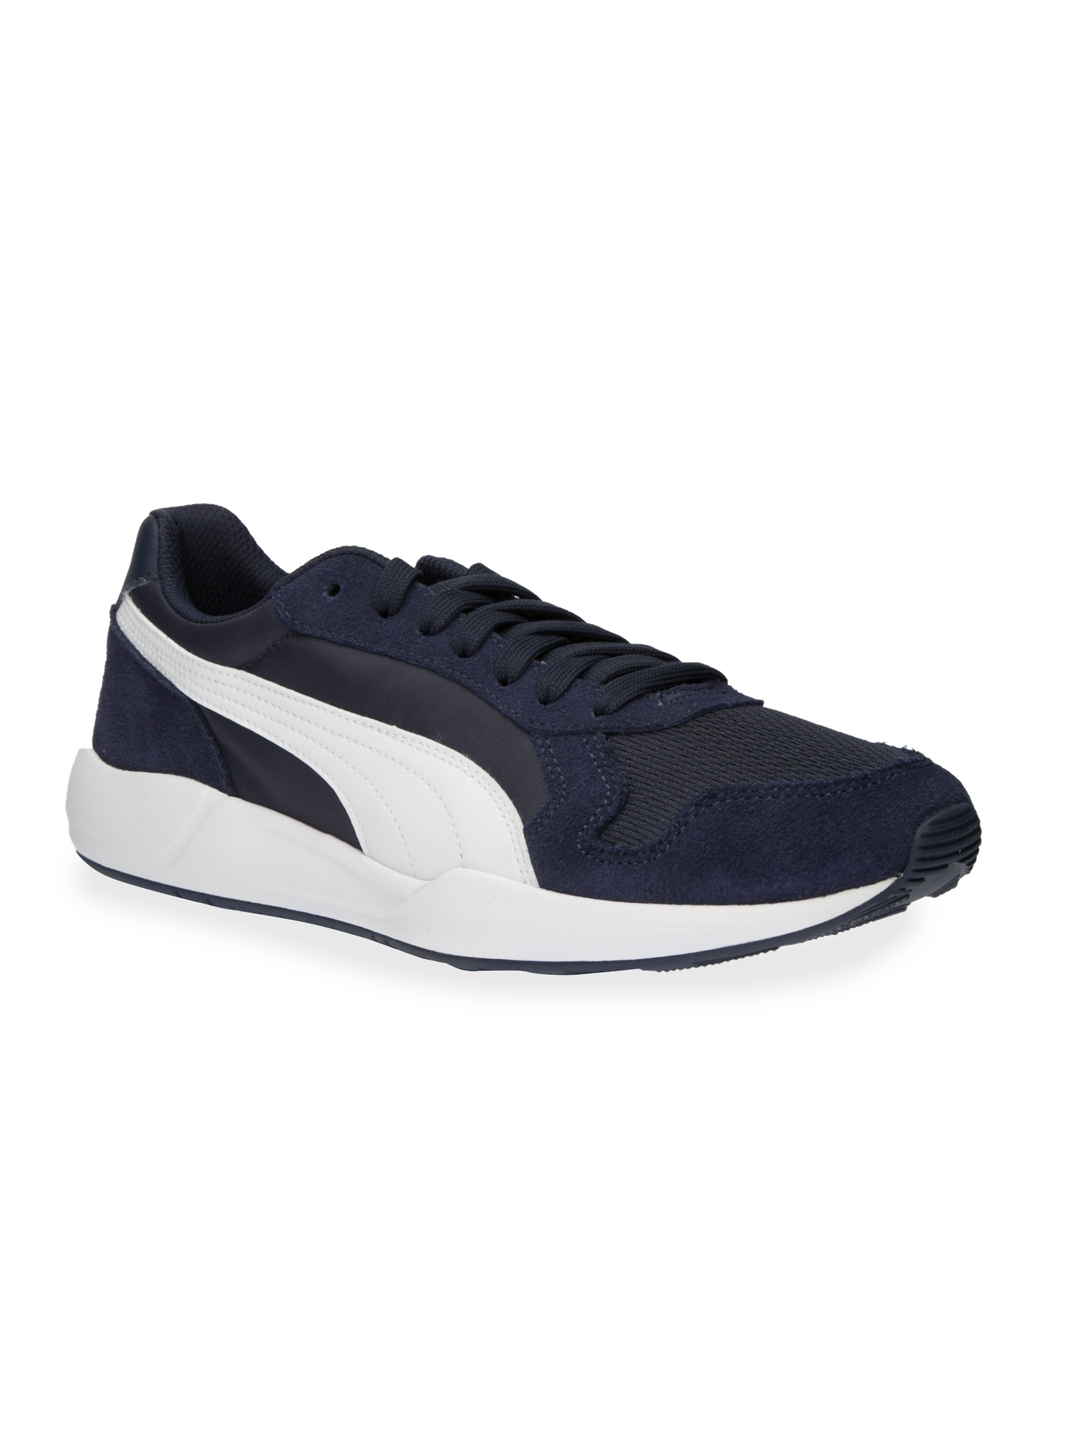 Buy Puma Men Navy Blue & White Sneakers - Casual Shoes for Men 1705602 ...